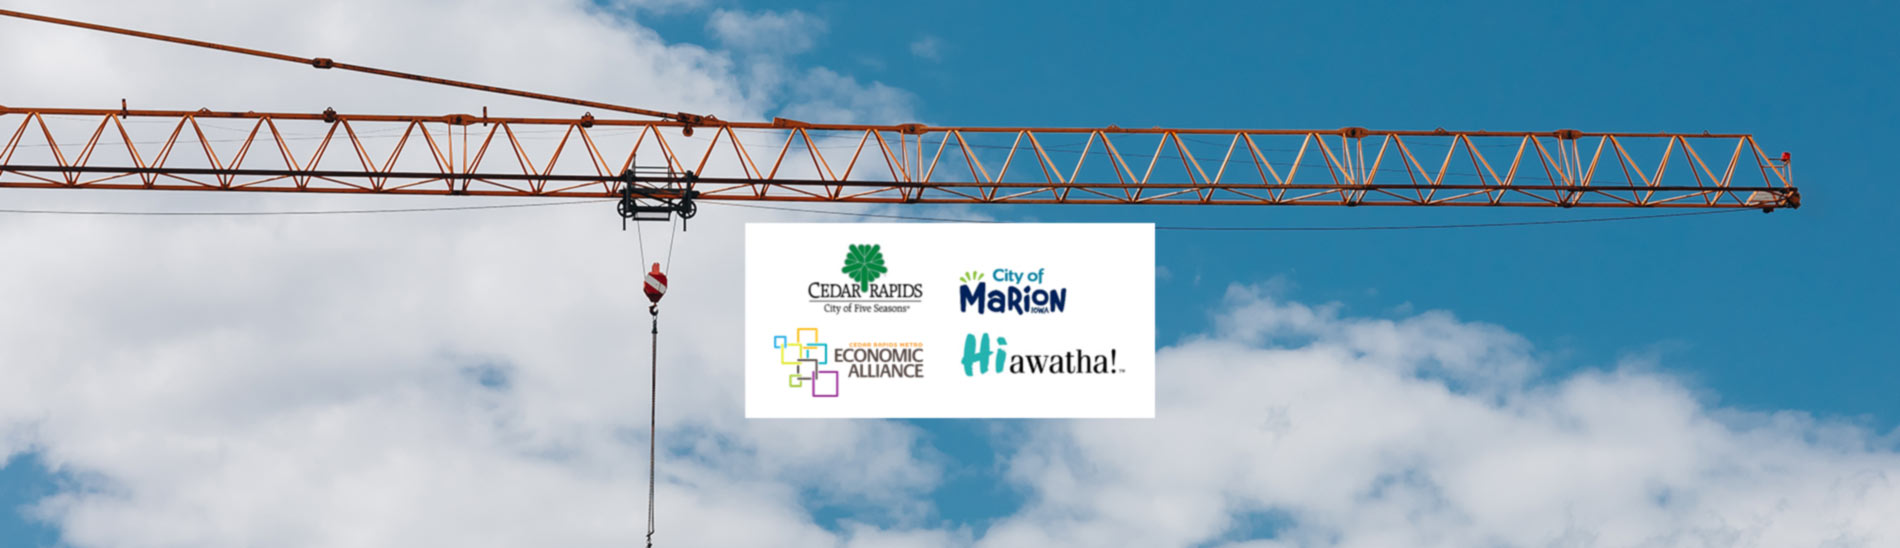 Logos of Cities of Cedar Rapids, Marion and Hiawatha and the Cedar Rapids Metro Economic Alliance set against a crane in the foreground with a partly cloudy sky.